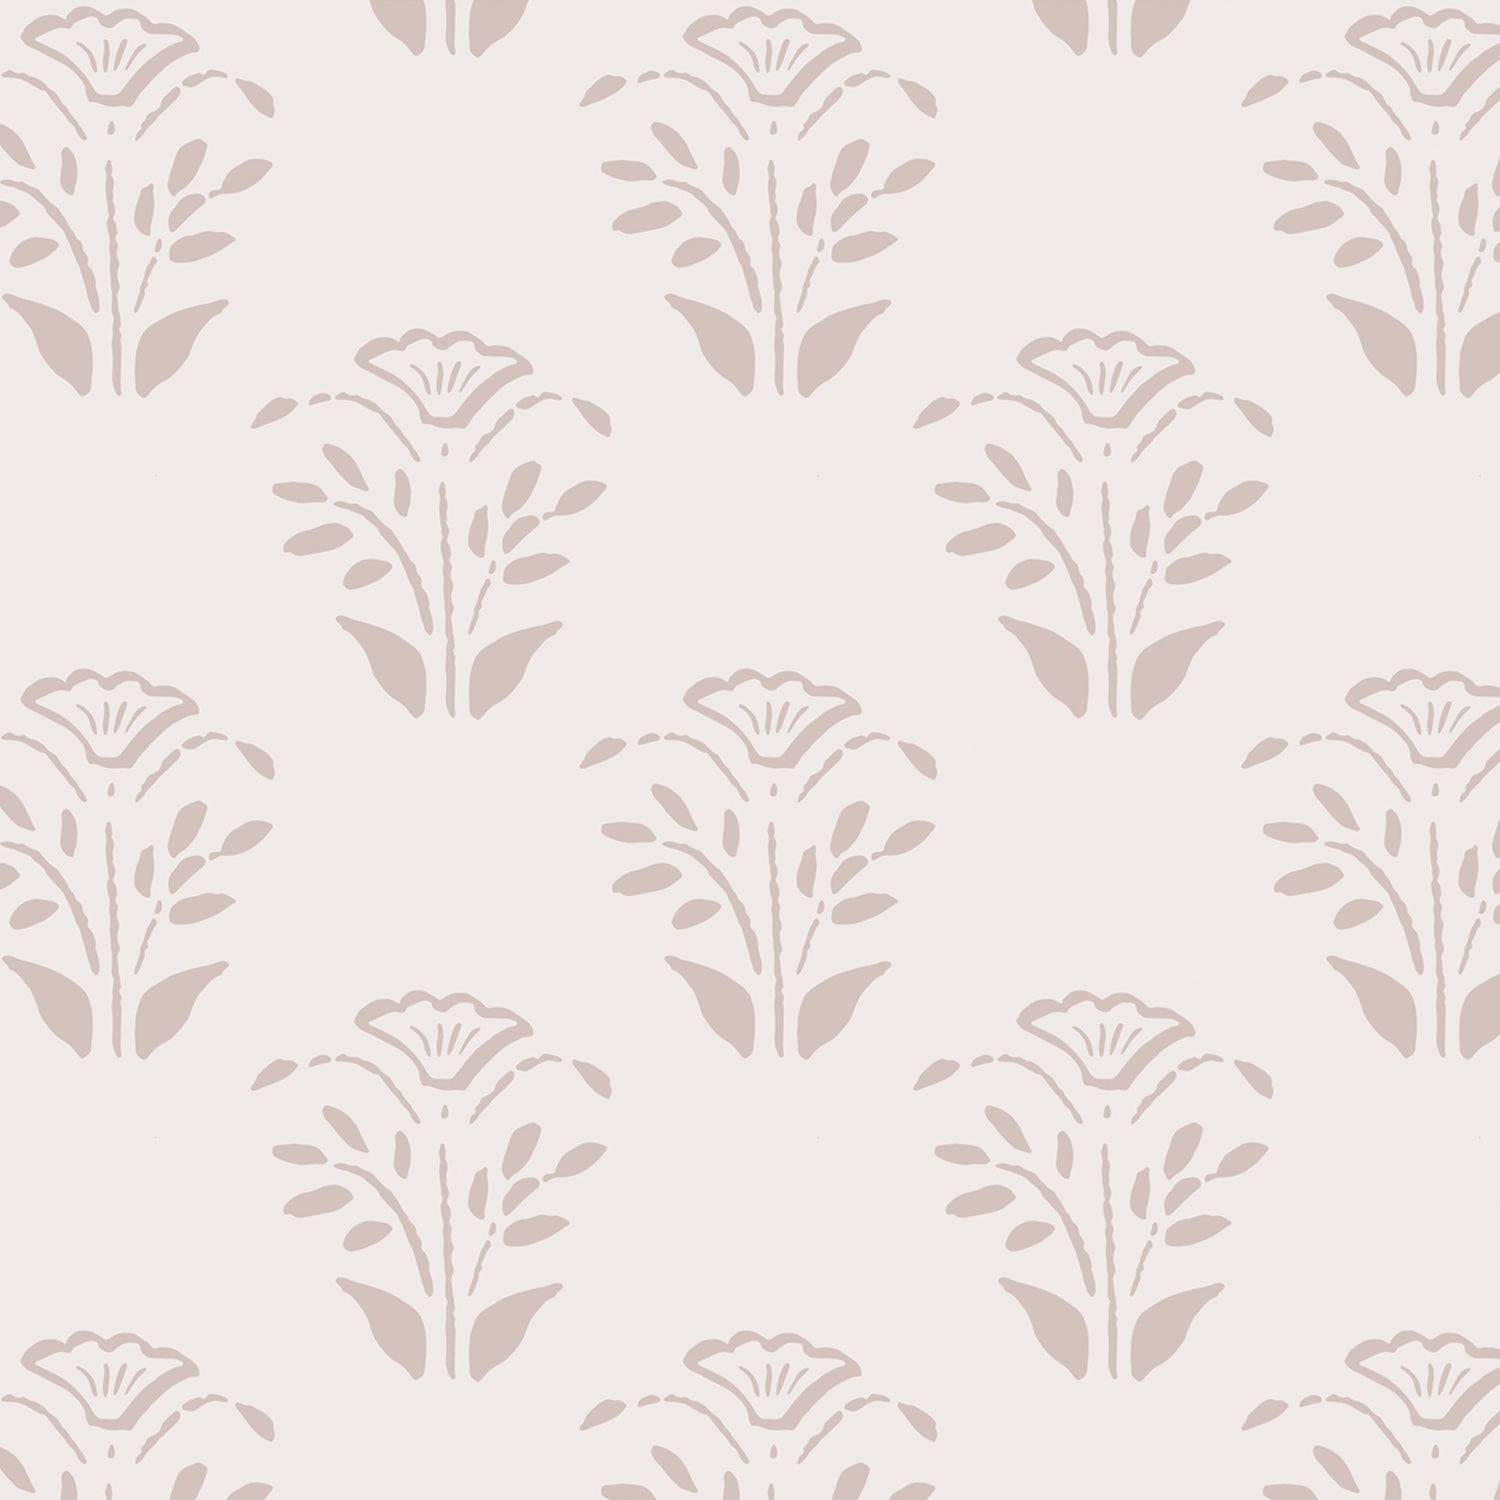 Close up of the Lulu Peel and Stick Wallpaper in bone by Jackie O'Bosky. Floral motifs placed symettrically in neutral taupe and bone colors. 